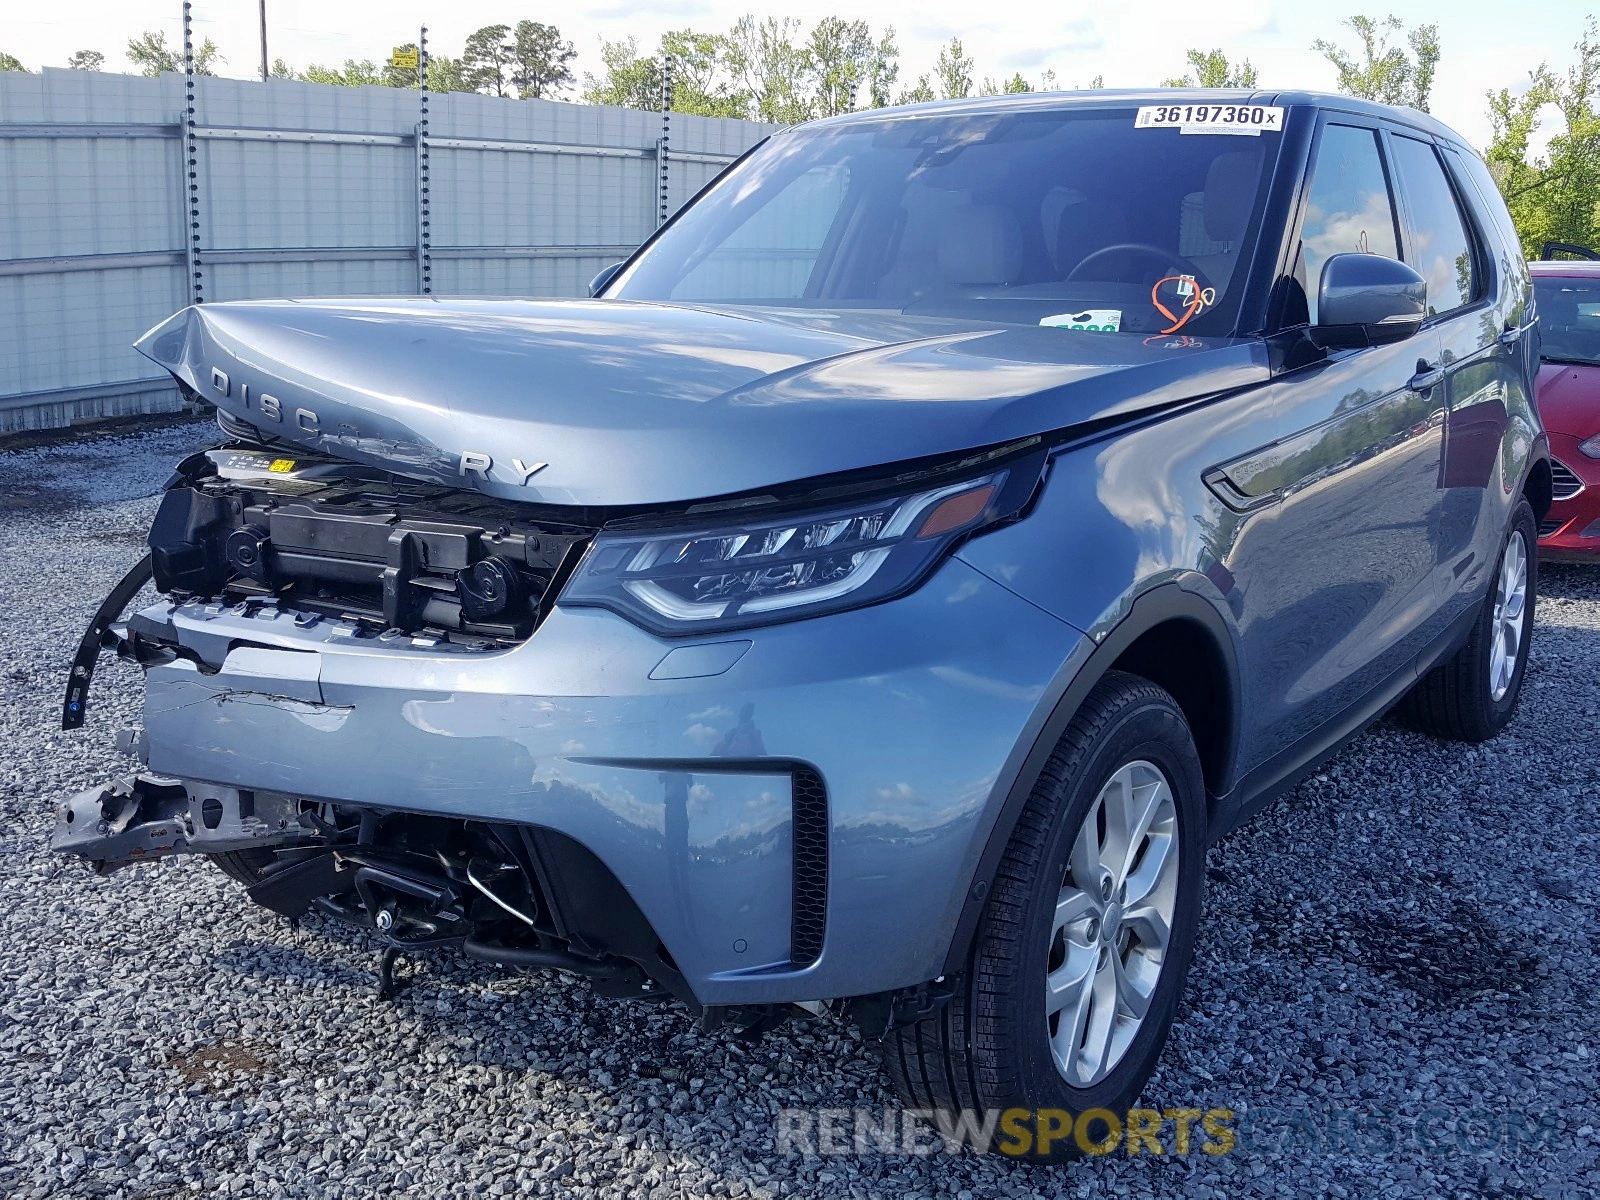 2 Photograph of a damaged car SALRG2RV0L2422624 LAND ROVER DISCOVERY 2020